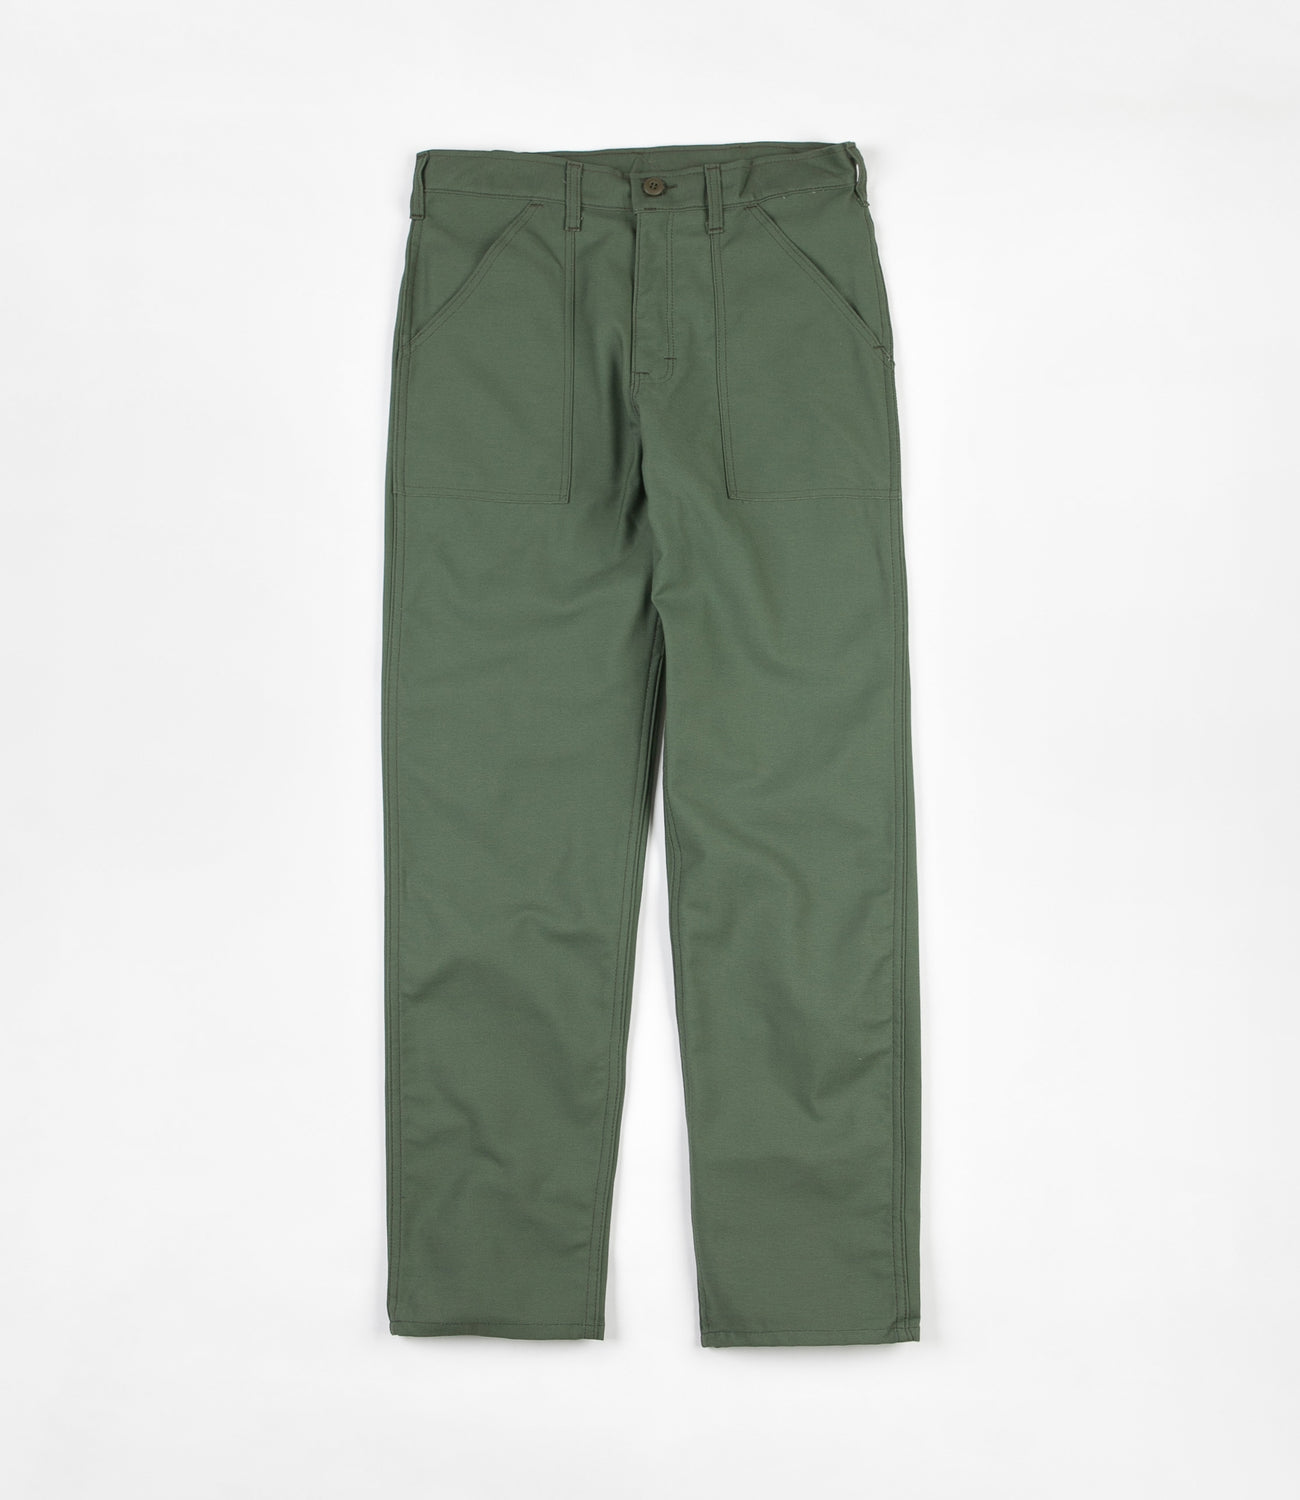 Stan Ray Taper Fit 4 Pocket Fatigue Trousers - Olive Sateen | Flatspot